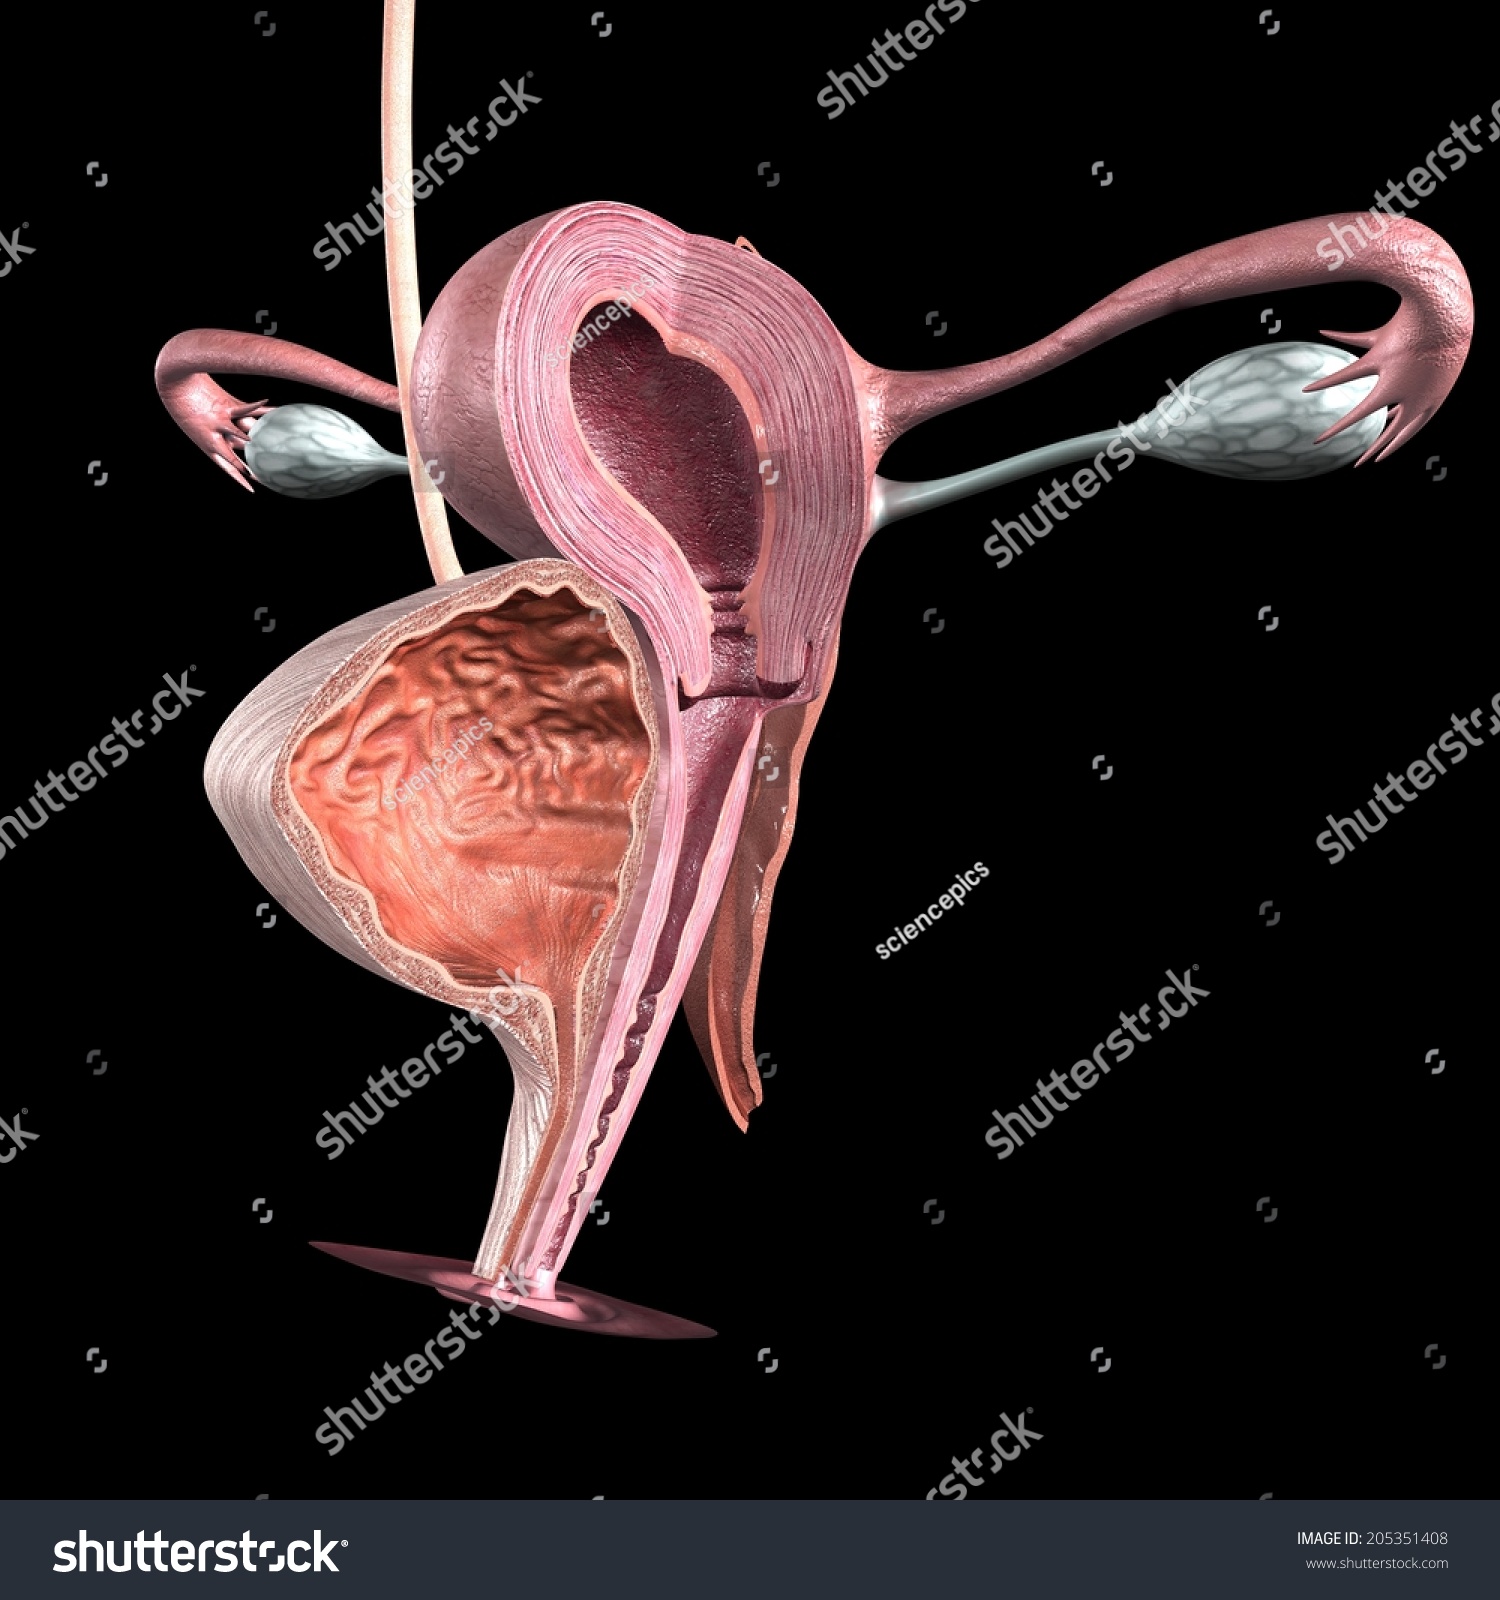 Female Reproductive System Stock Photo Shutterstock